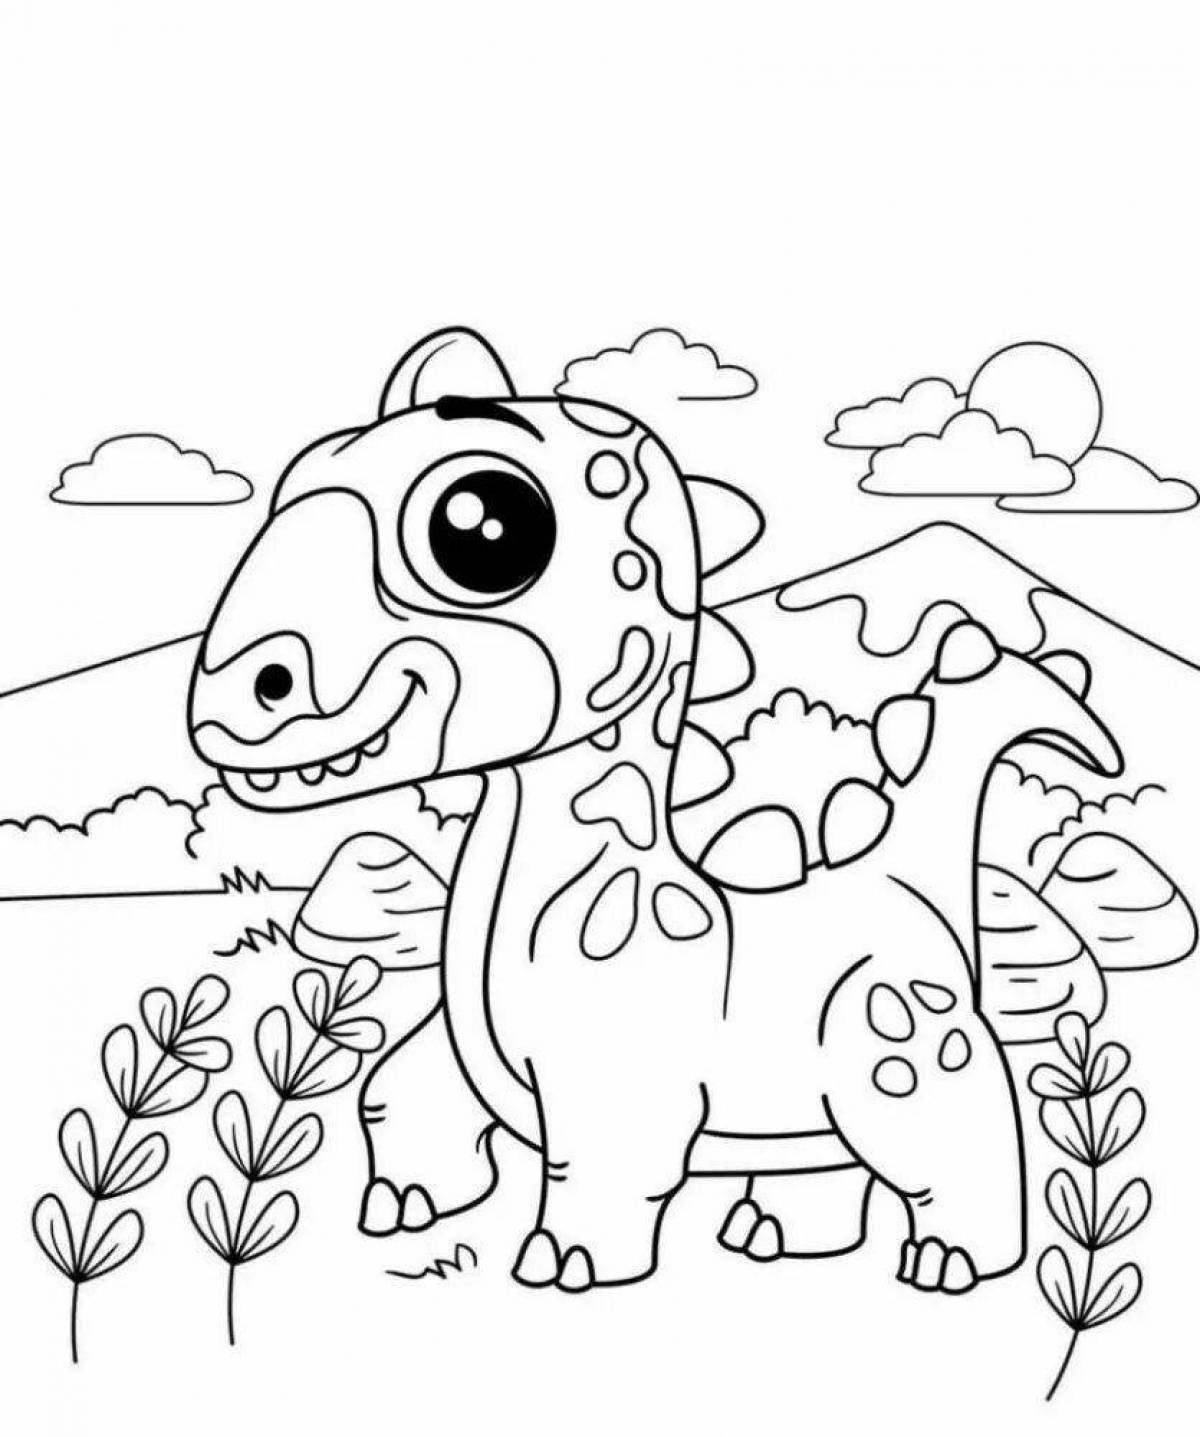 Amazing dinosaurs coloring book for 4-5 year olds